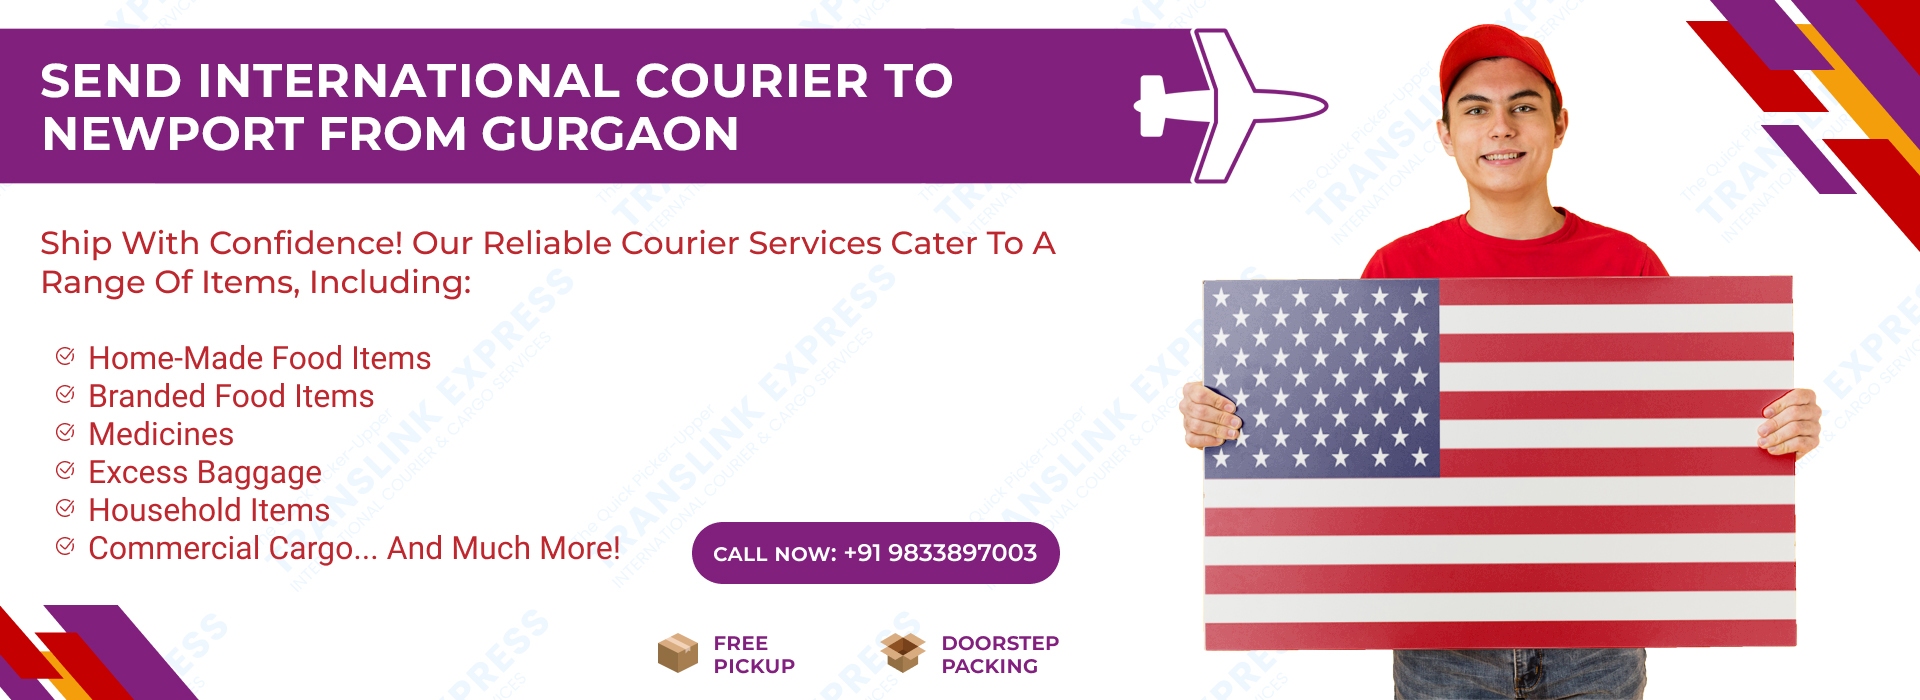 Courier to Newport From Gurgaon